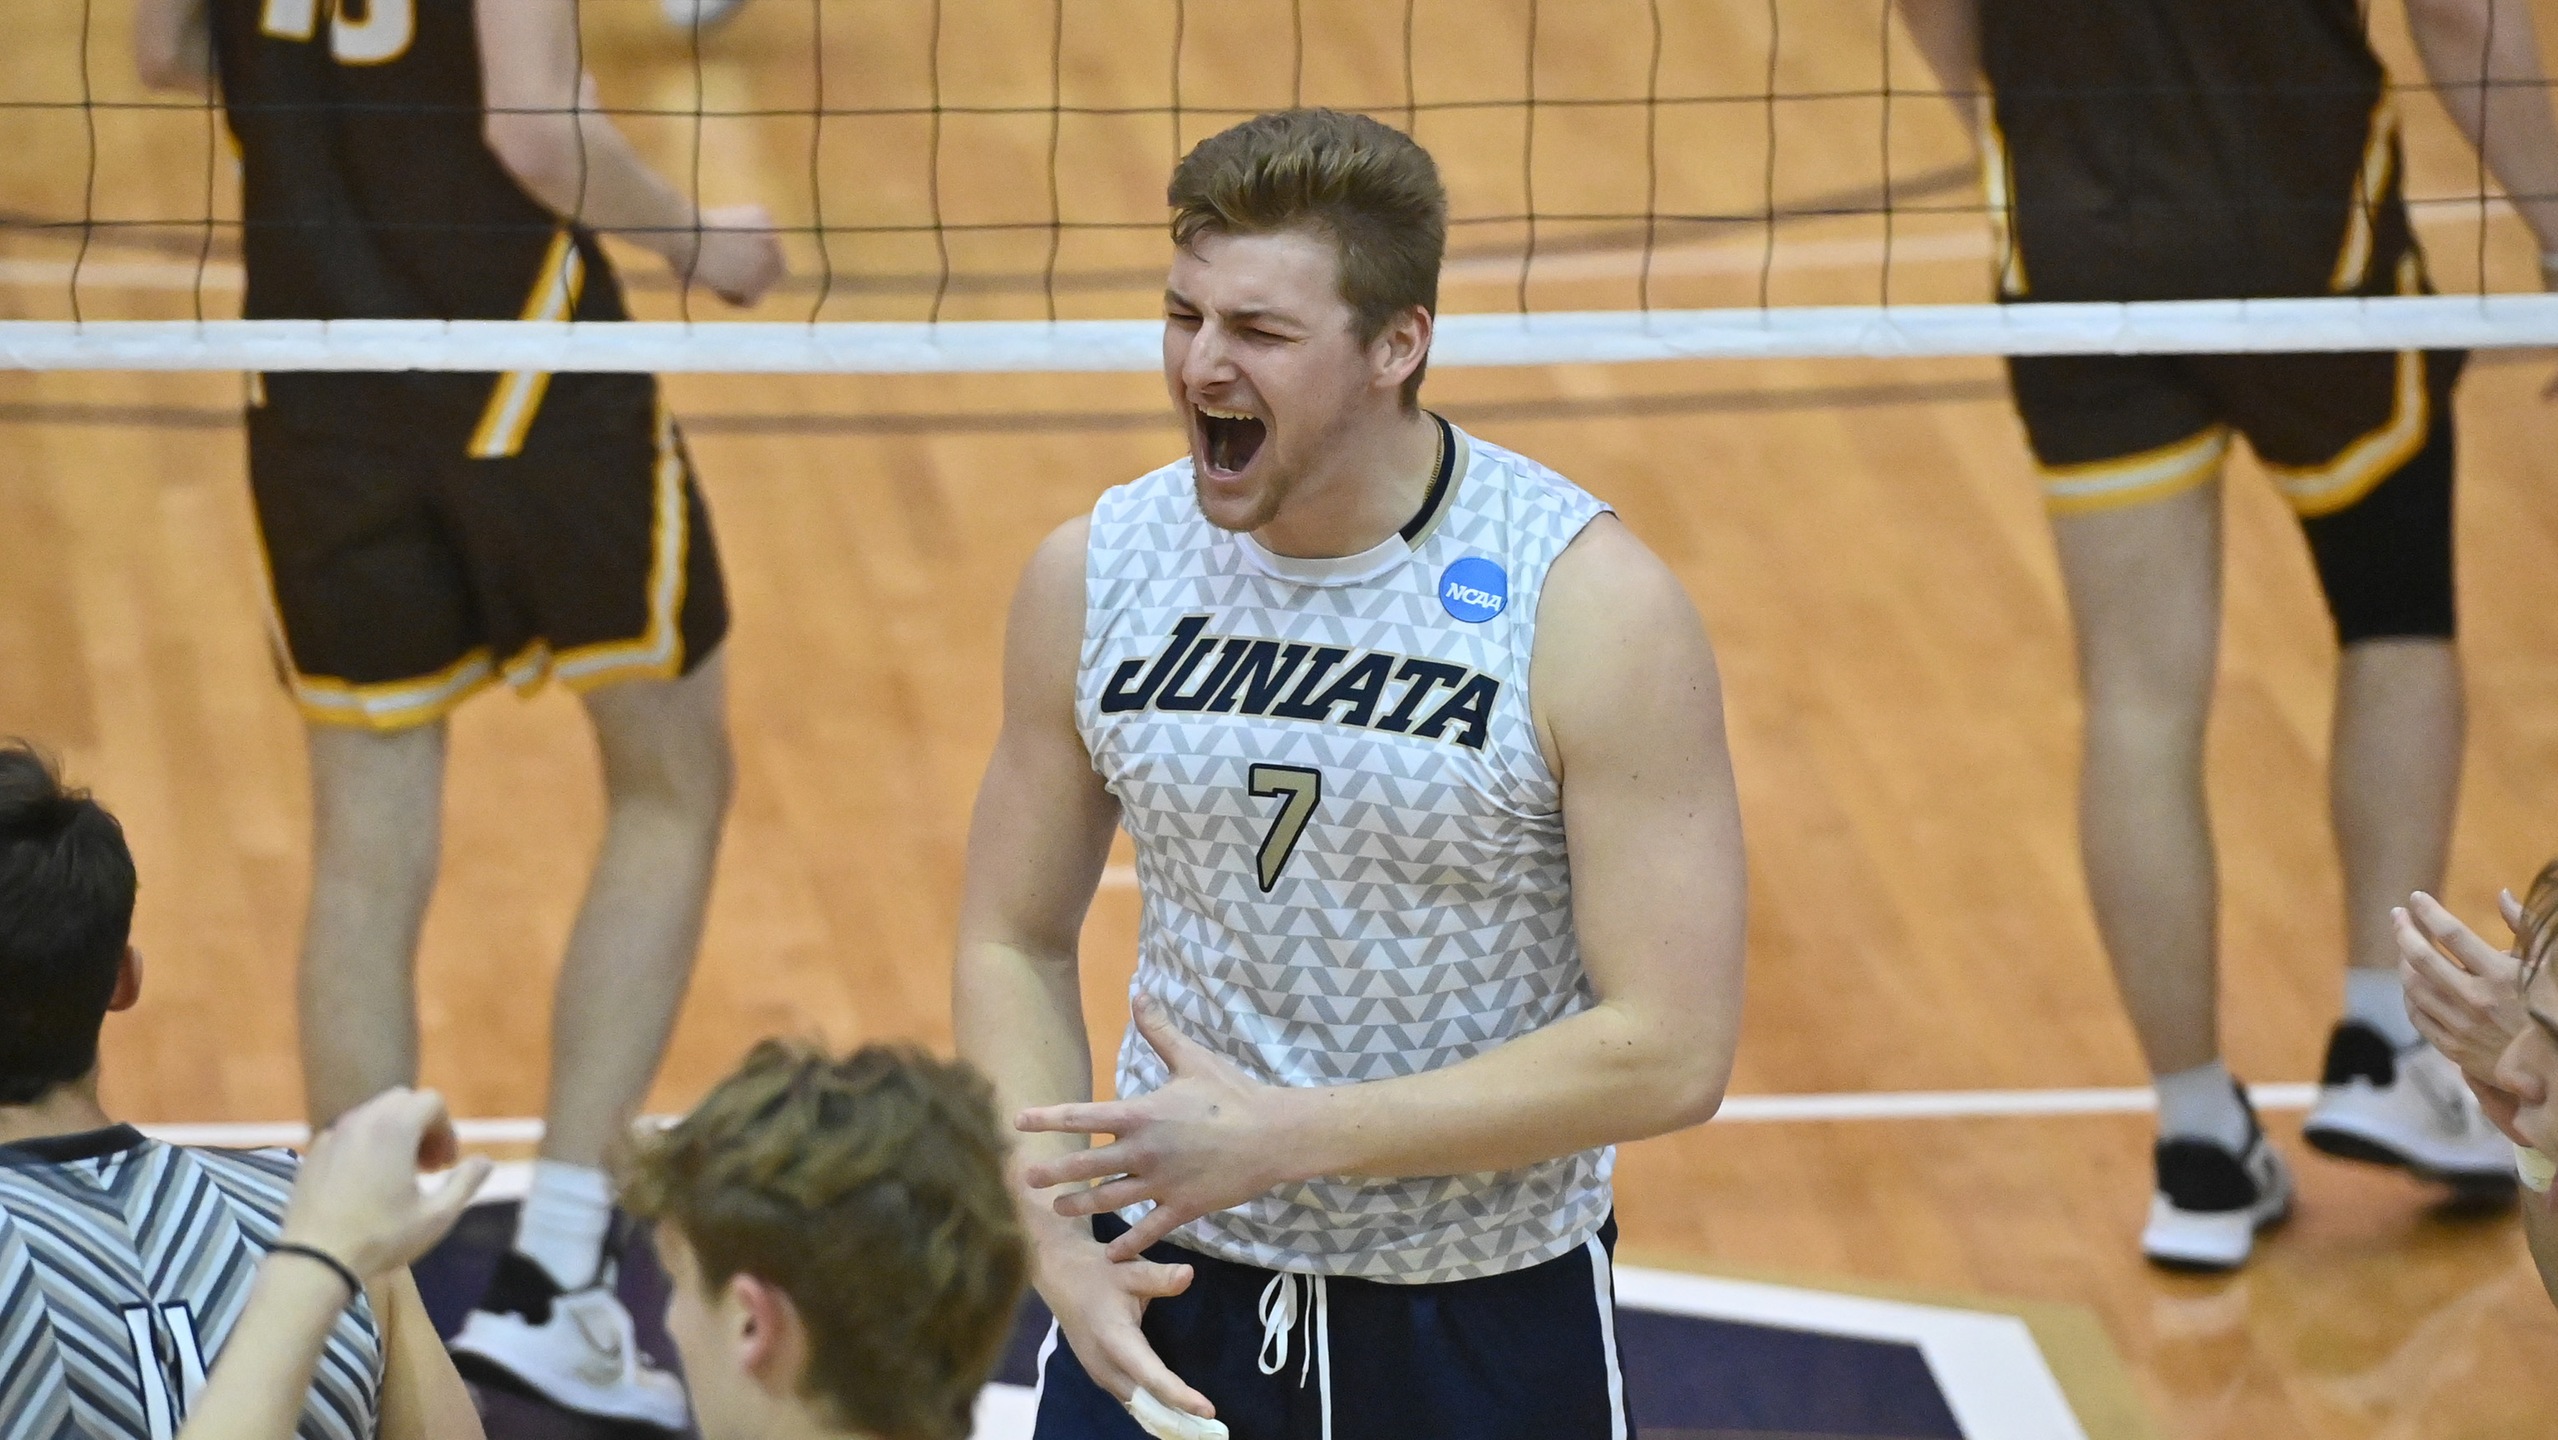 Eagles Top Yellow Jackets To Advance to the NCAA Quarterfinals As Duffy Breaks Program Record for Solo Blocks